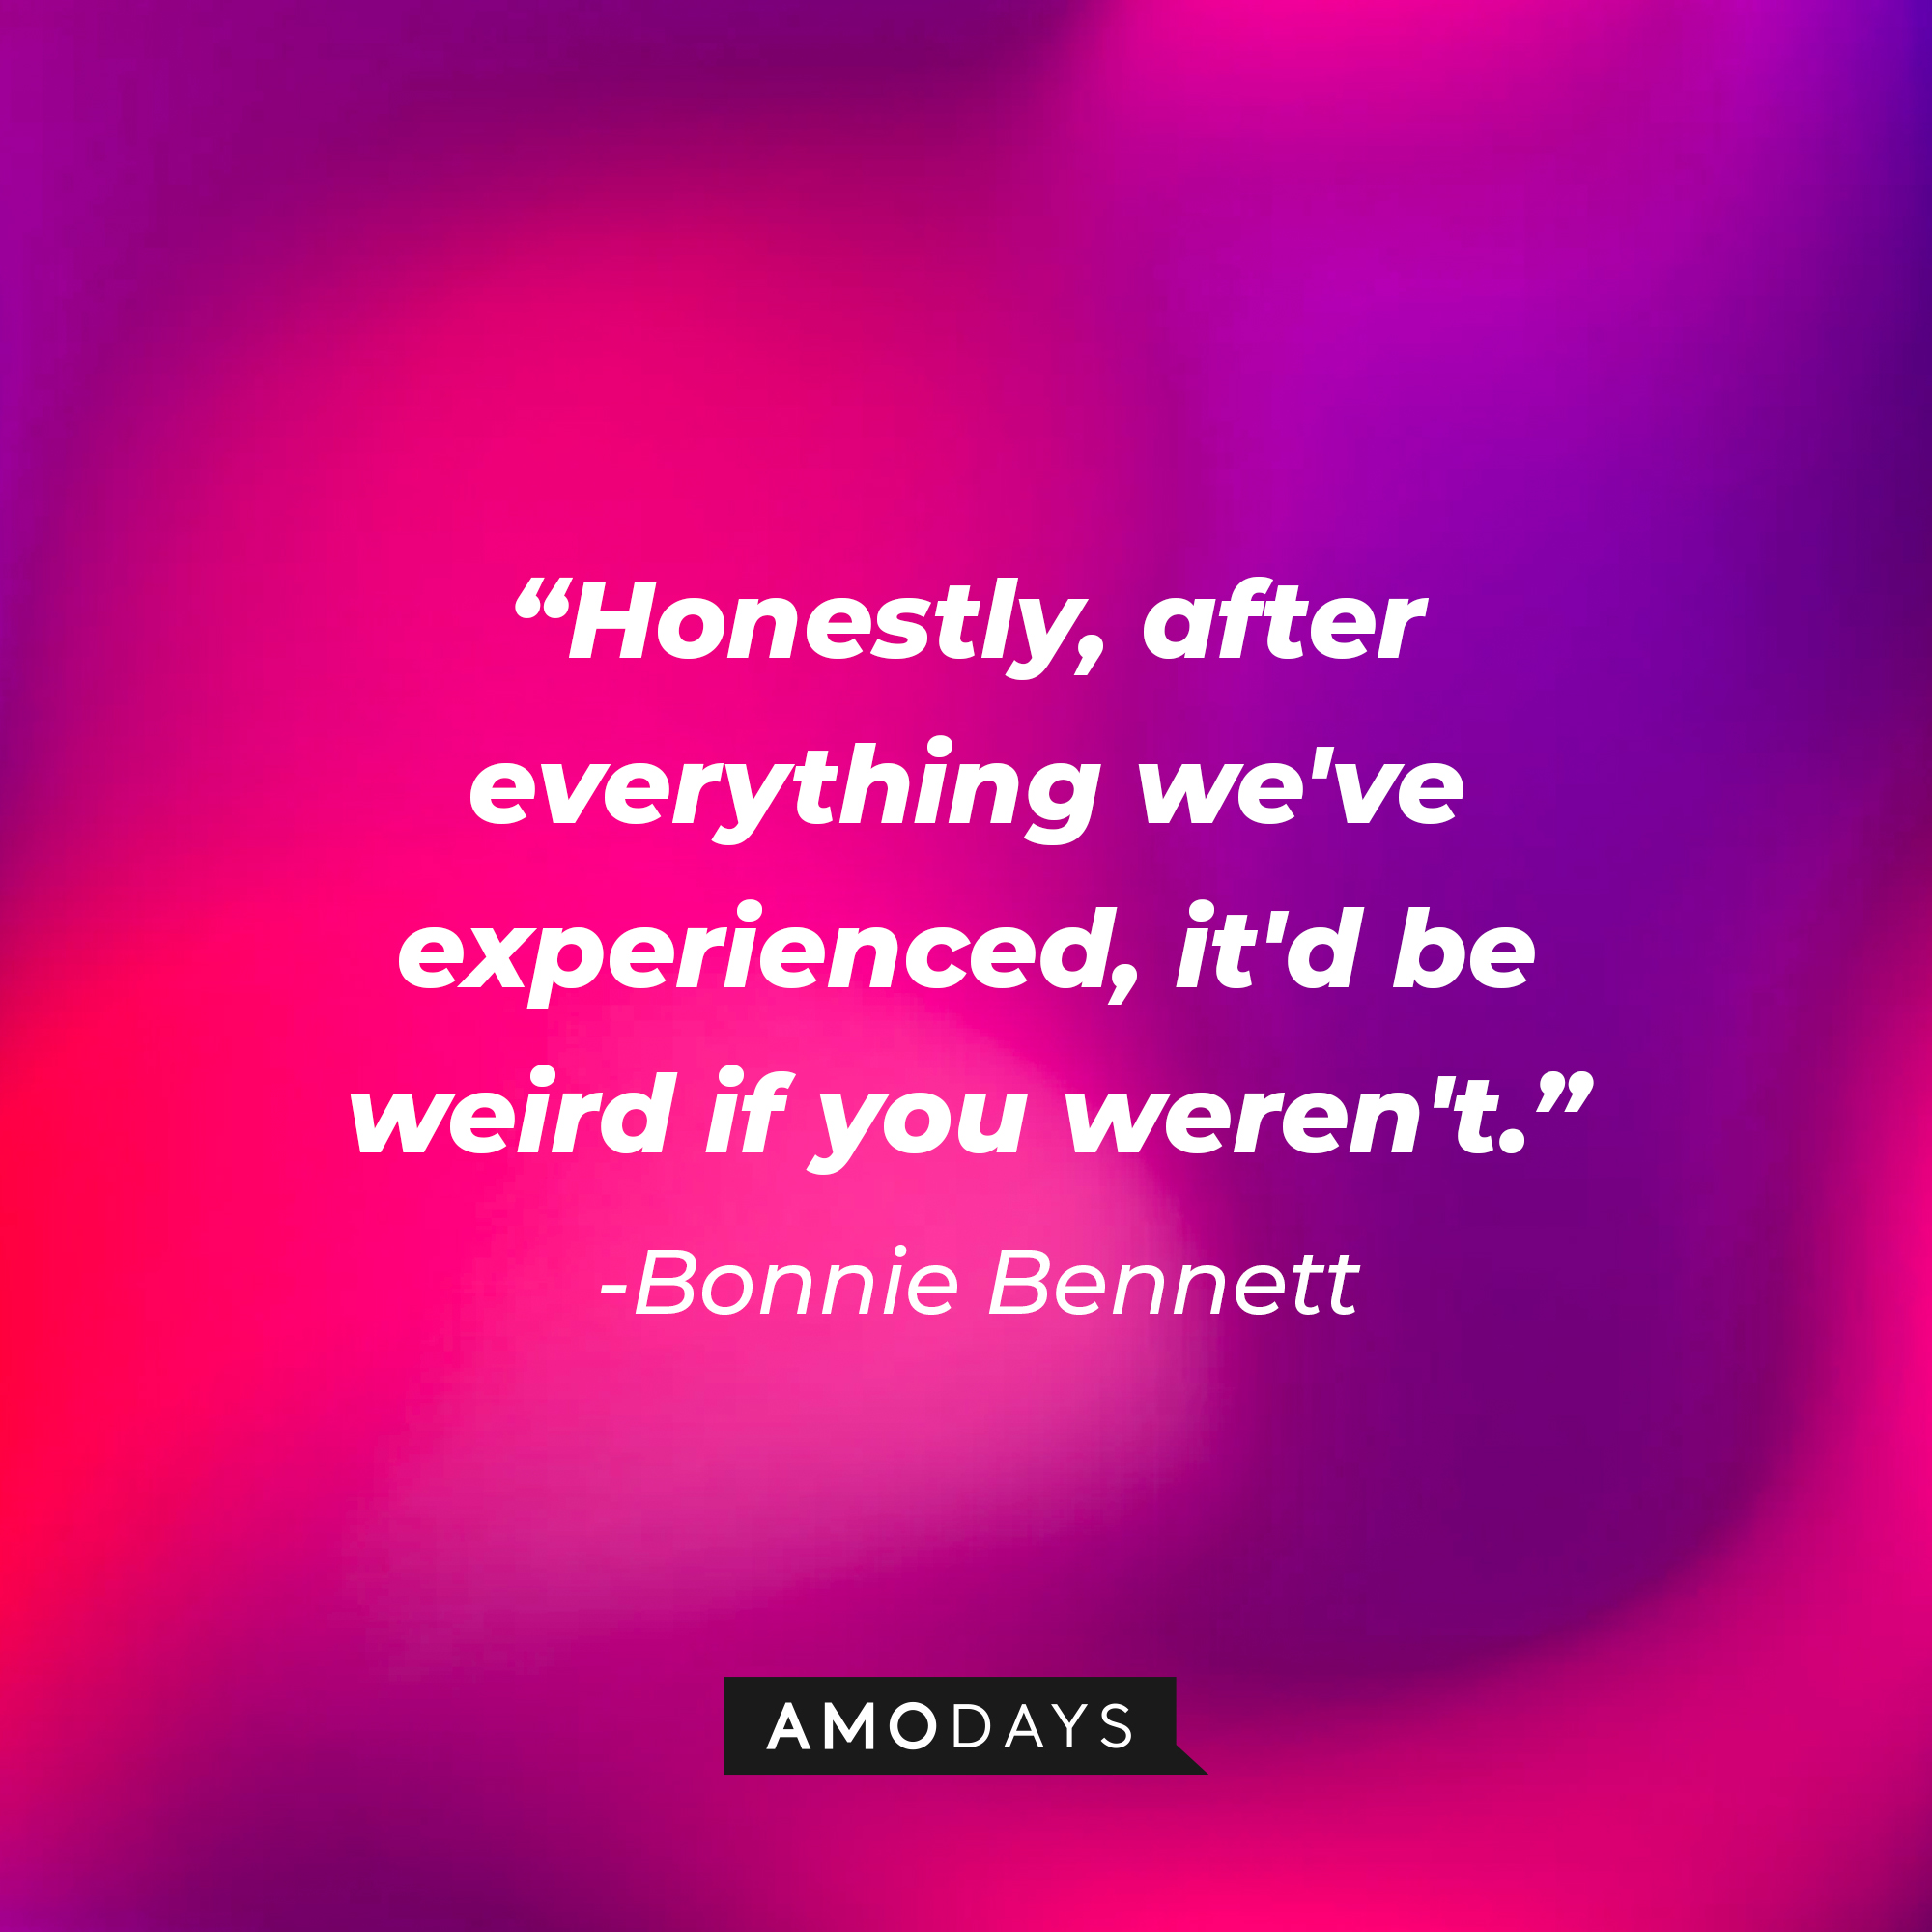 Bonnie Bennett’s quote: “Honestly, after everything we've experienced, it'd be weird if you weren't.” | Source: AmoDays